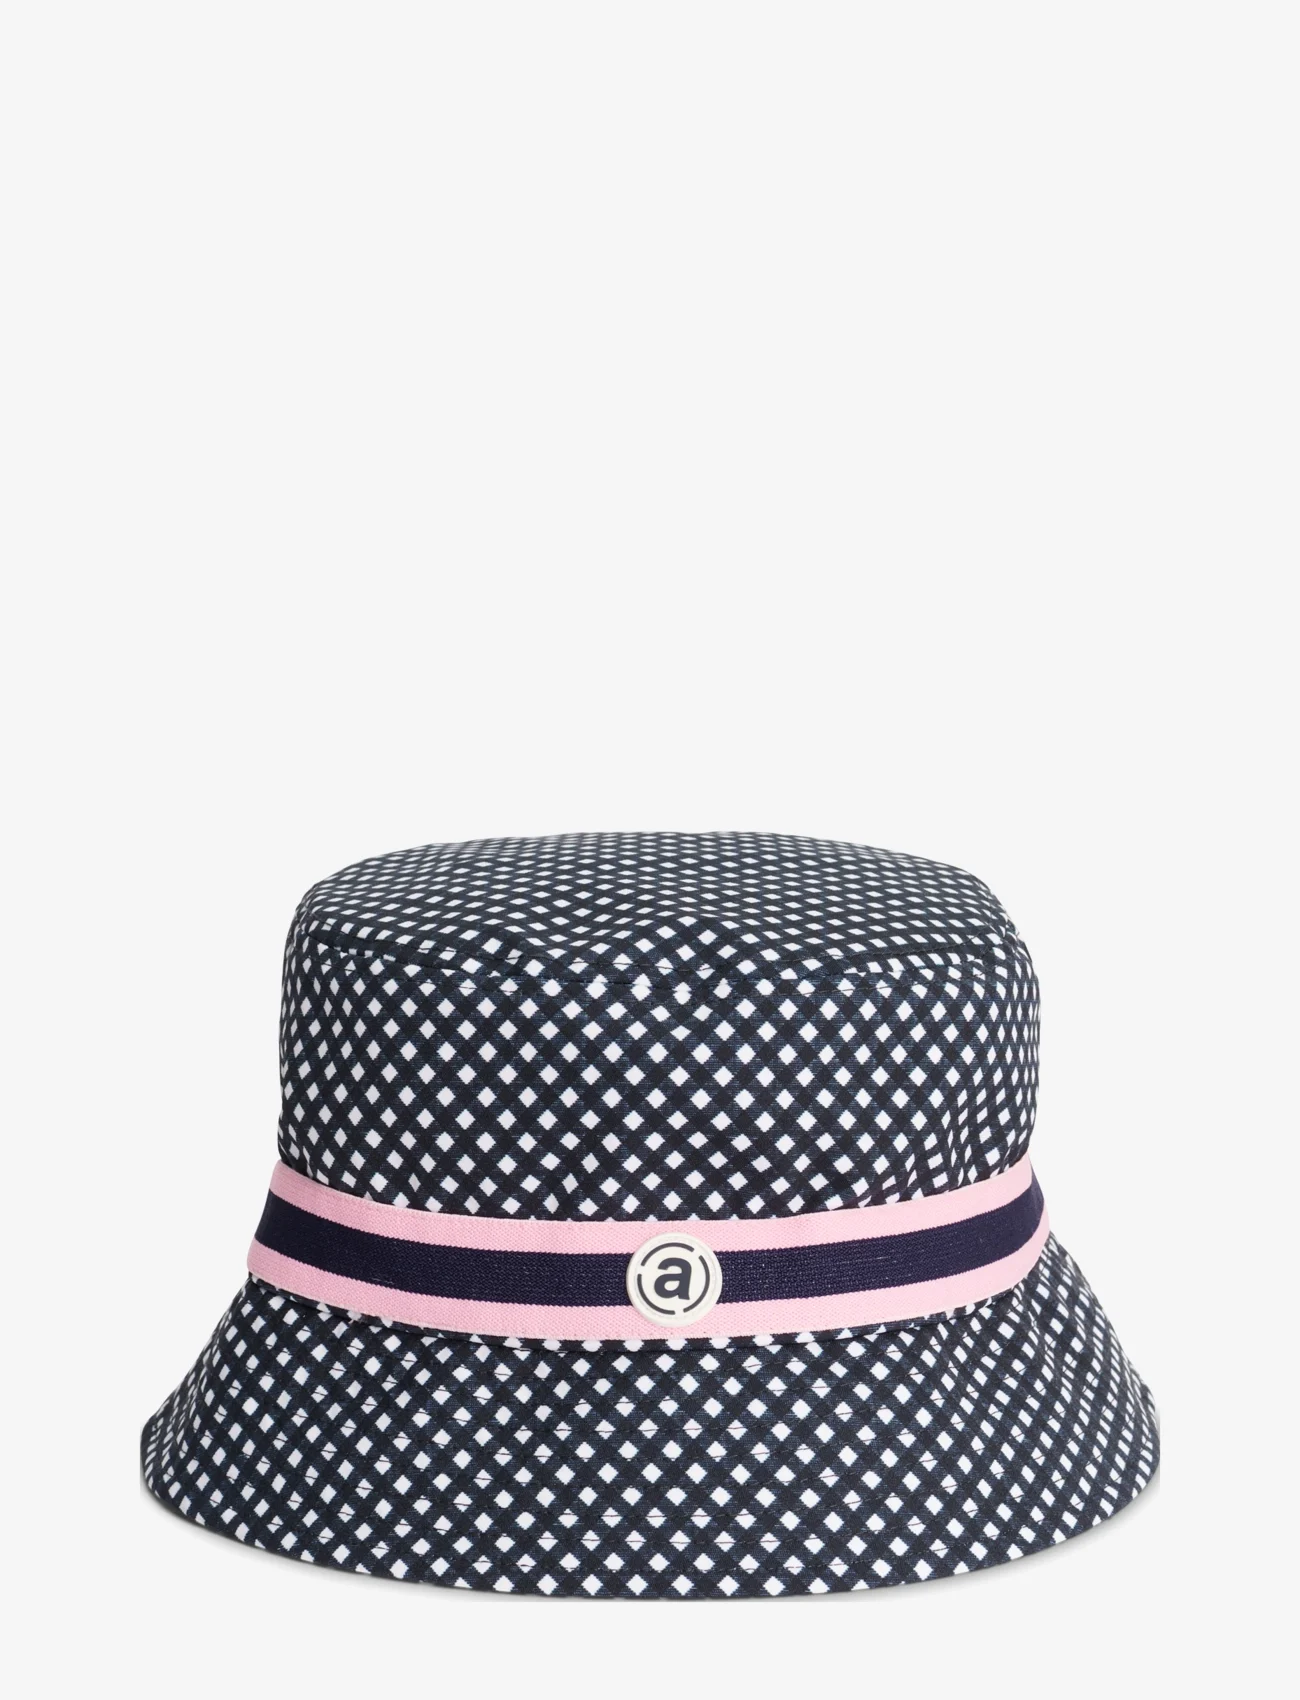 Abacus - Merion hat - bucket hats - navy check - 1